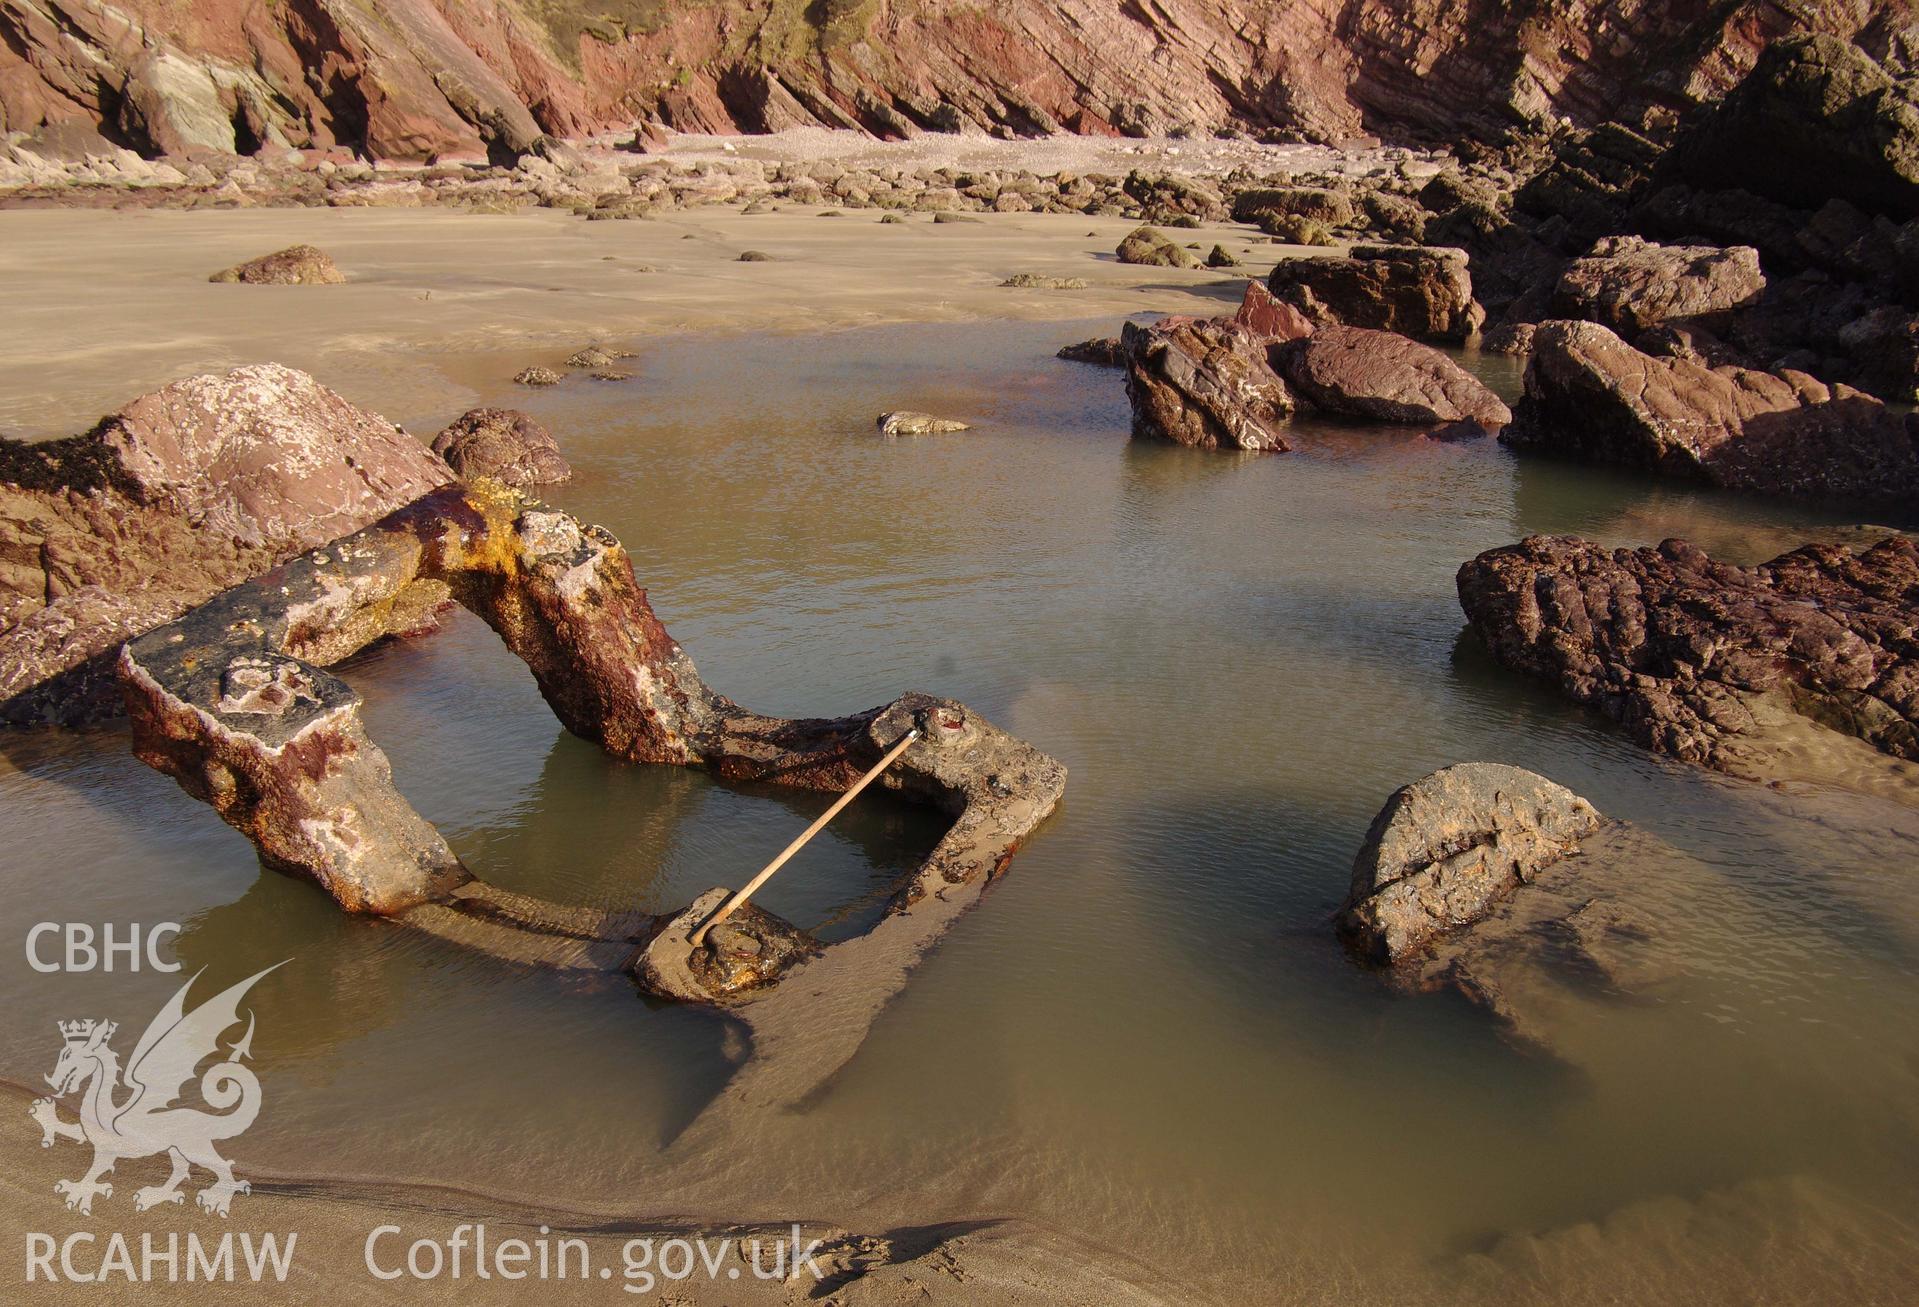 Parts of the wreck partially exposed on the beach, partially submerged. Taken by Hannah Genders Boyd. Produced with EU funds through the Ireland Wales Co-operation Programme 2014-2023. All material made freely available through the Open Government Licence